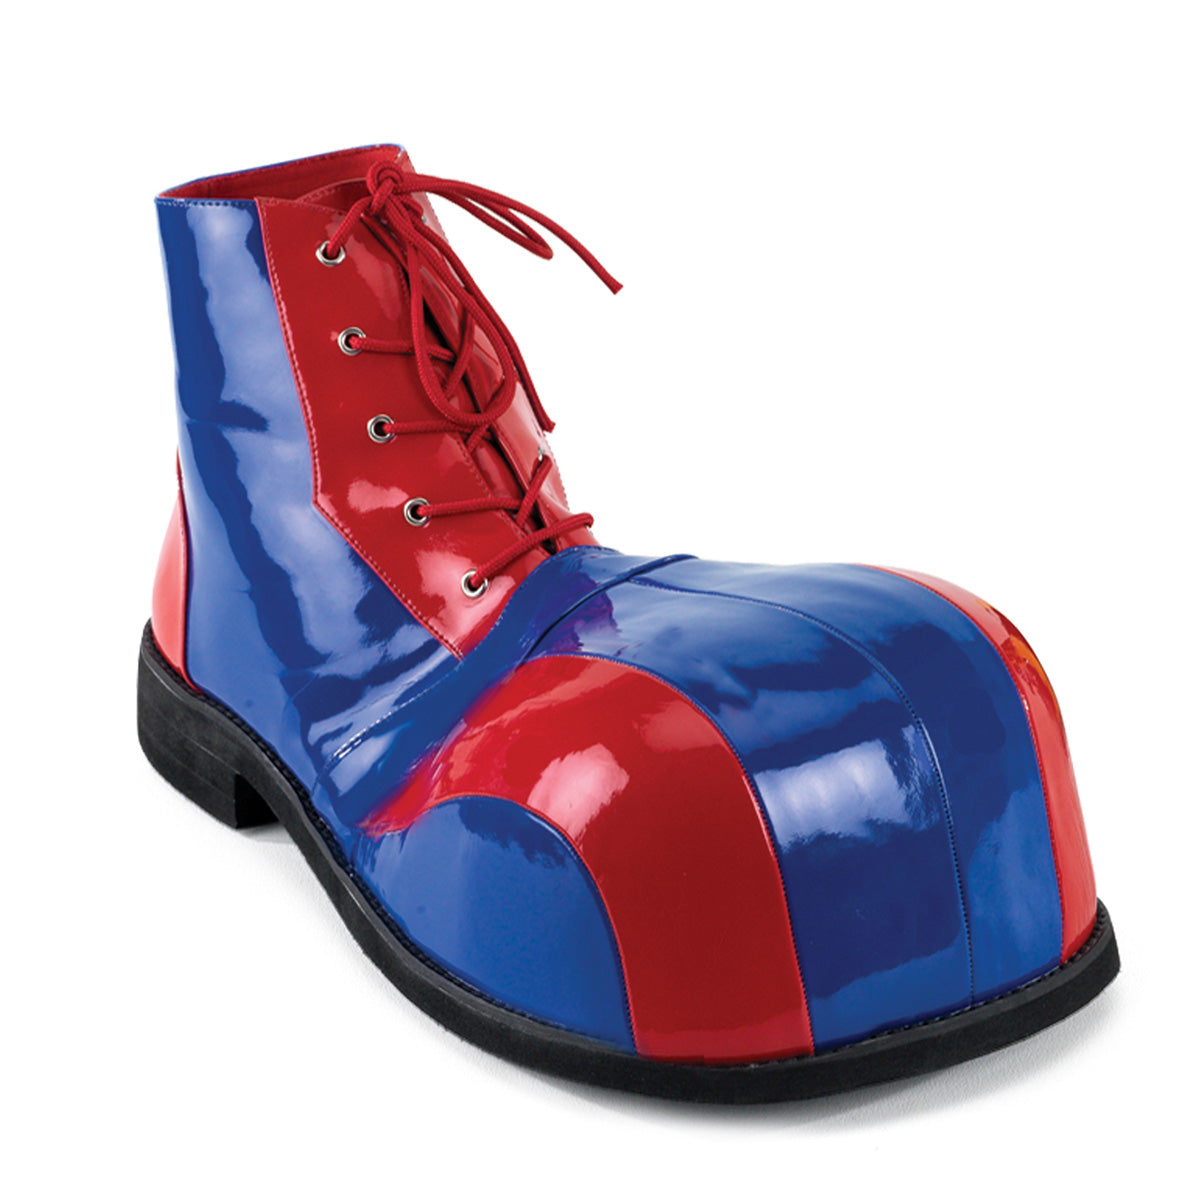 CLOWN-05 Red-Blue Patent